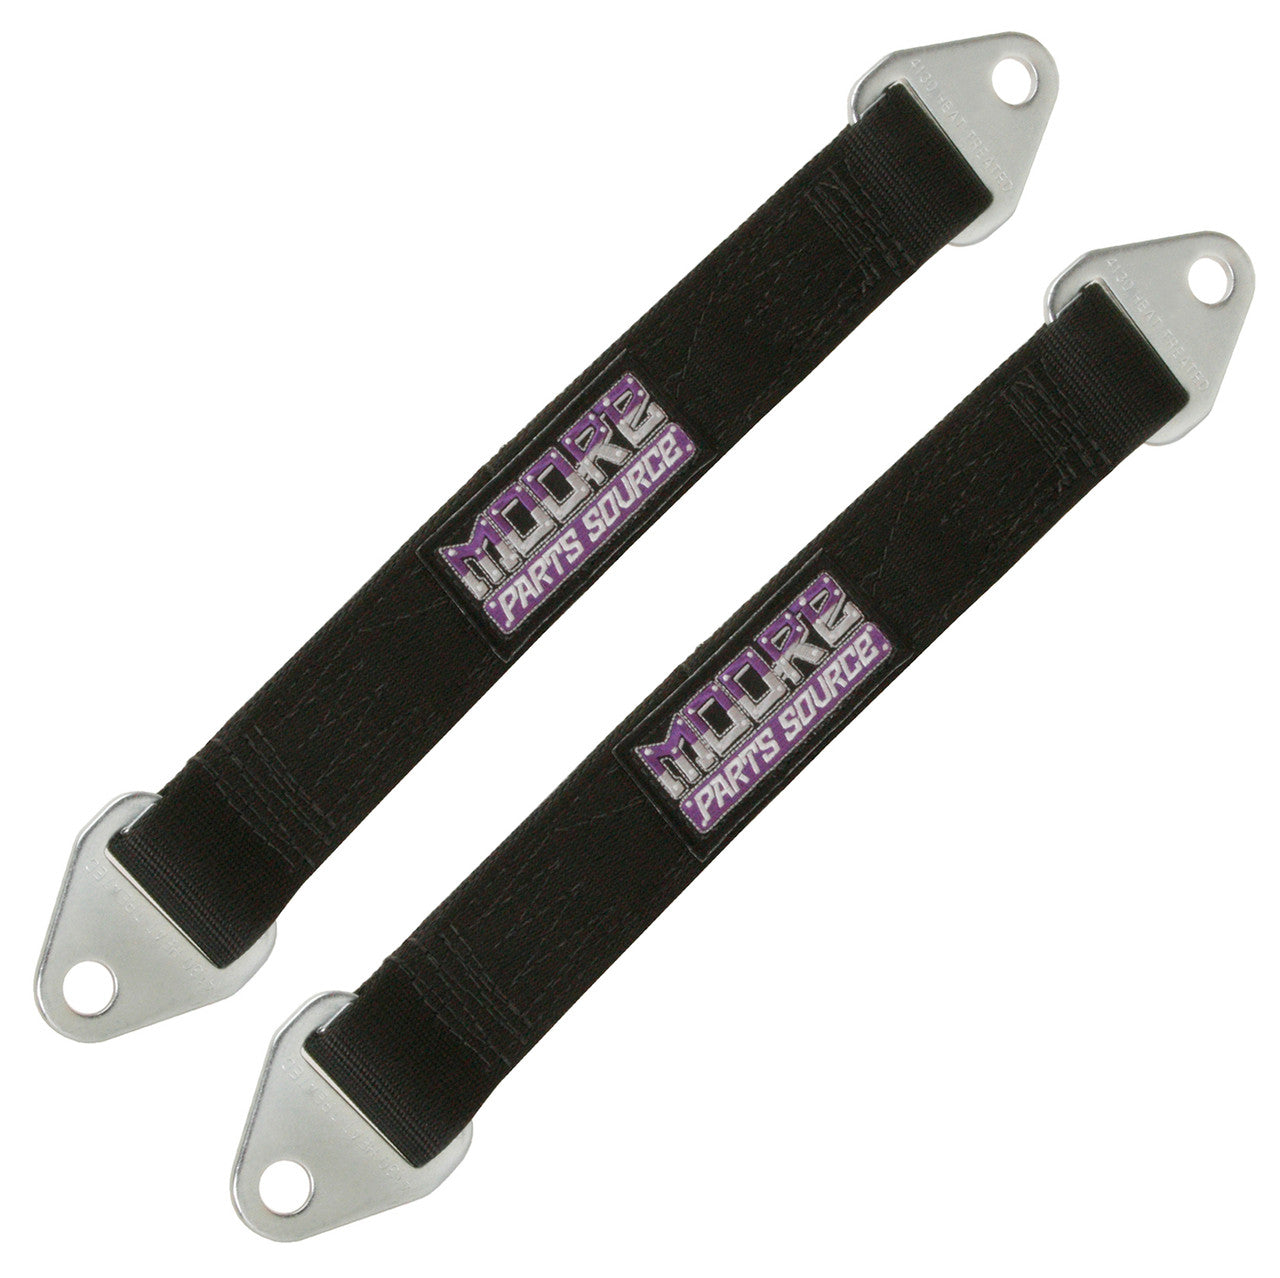 27 Inch USA Made Off-Road Suspension Limit Straps, Sold As Pair